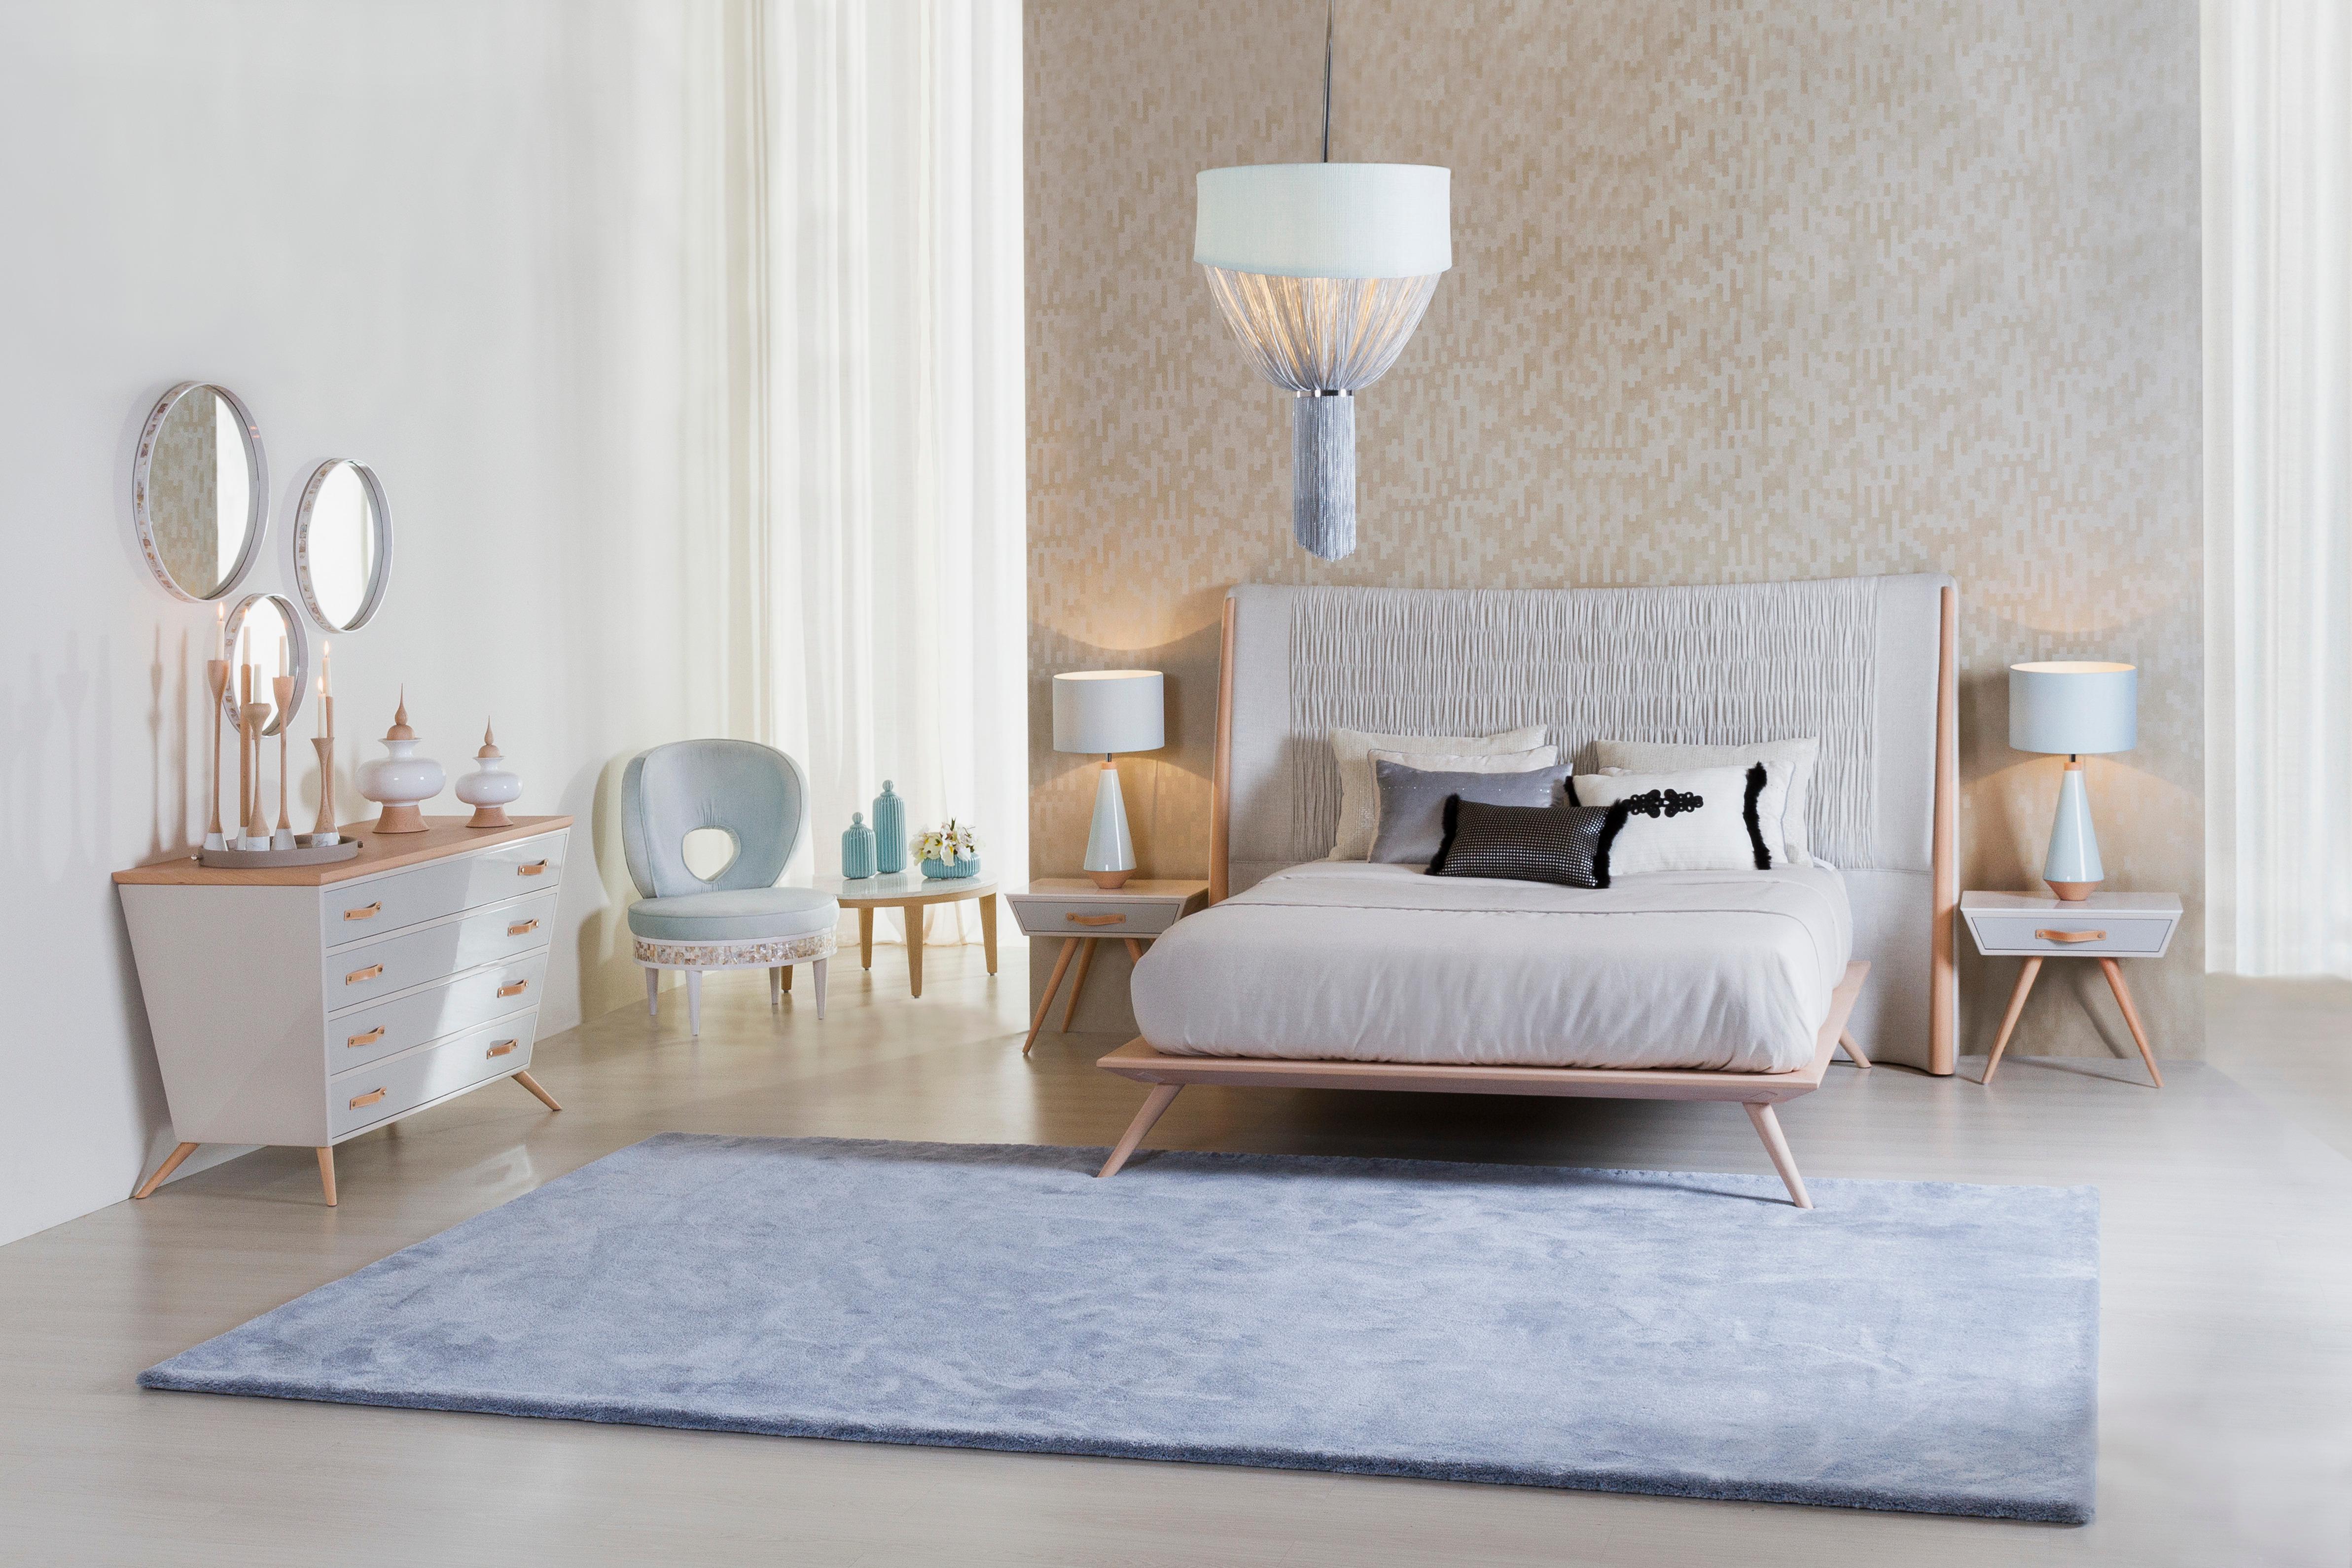 Dandelion double bed, Modern Collection, Handcrafted in Portugal - Europe by GF Modern.

Dandelion is an elegant bed with an headboard upholstered in beige cotton-linen blend fabric. It was designed to combine modern comfort with elegant details.